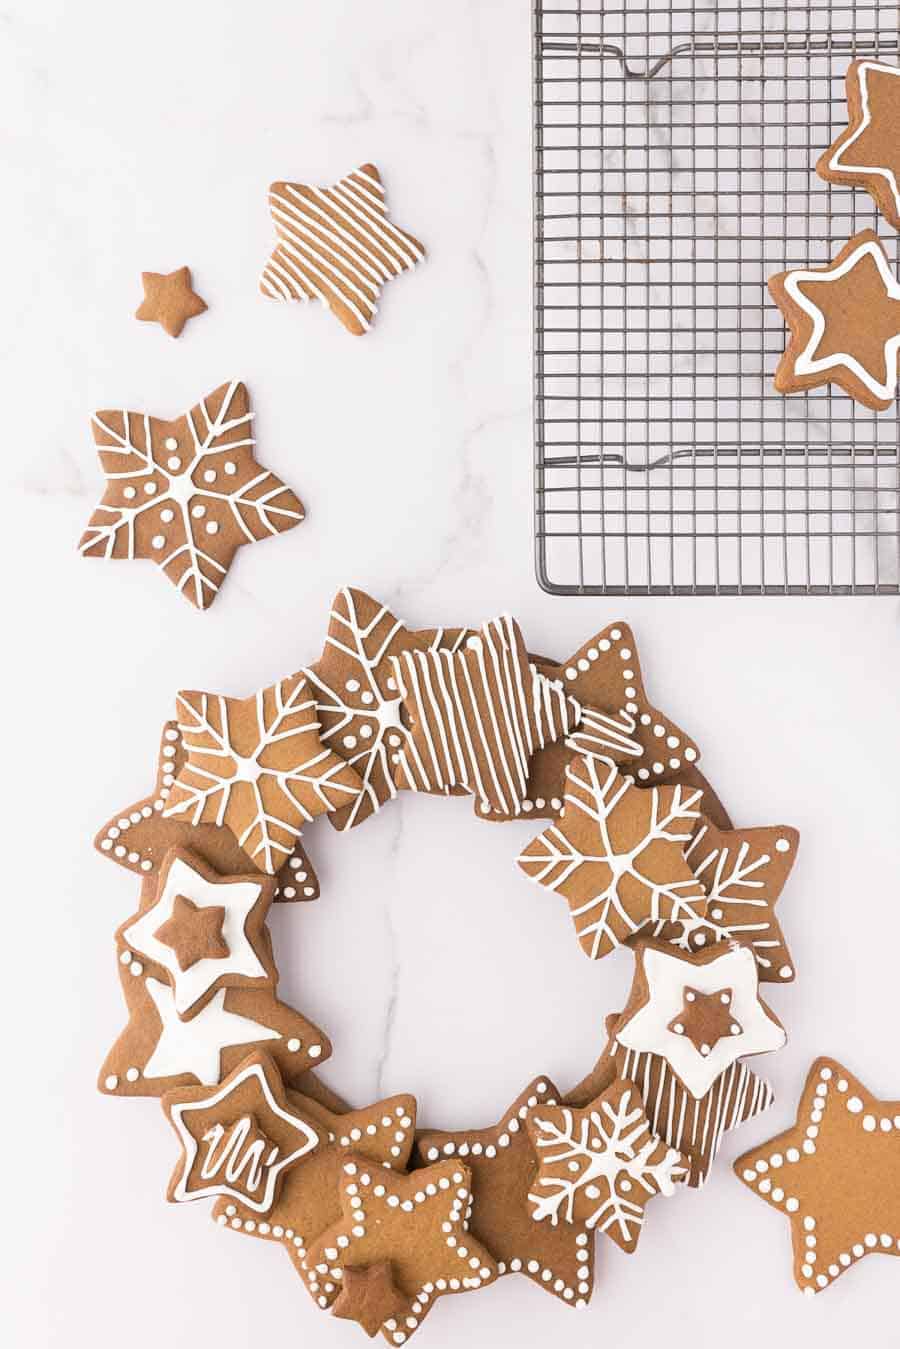 star shaped gingerbread cookie wreath